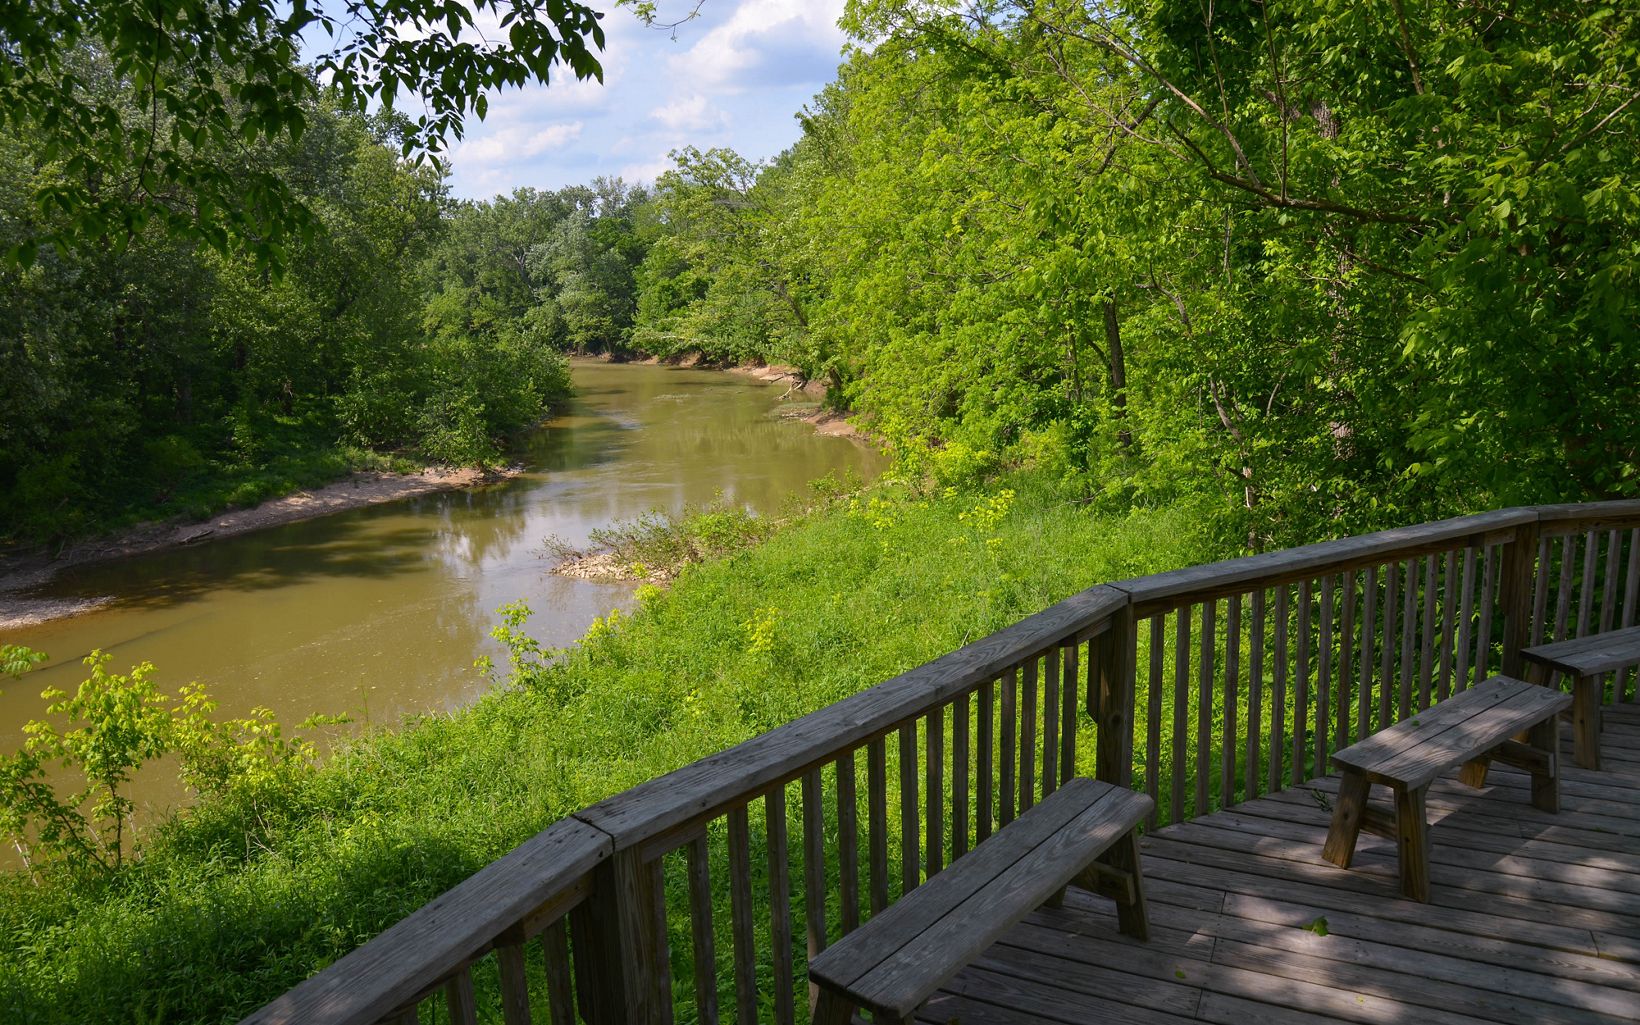 View from a wooden deck out over a slow-moving creek.